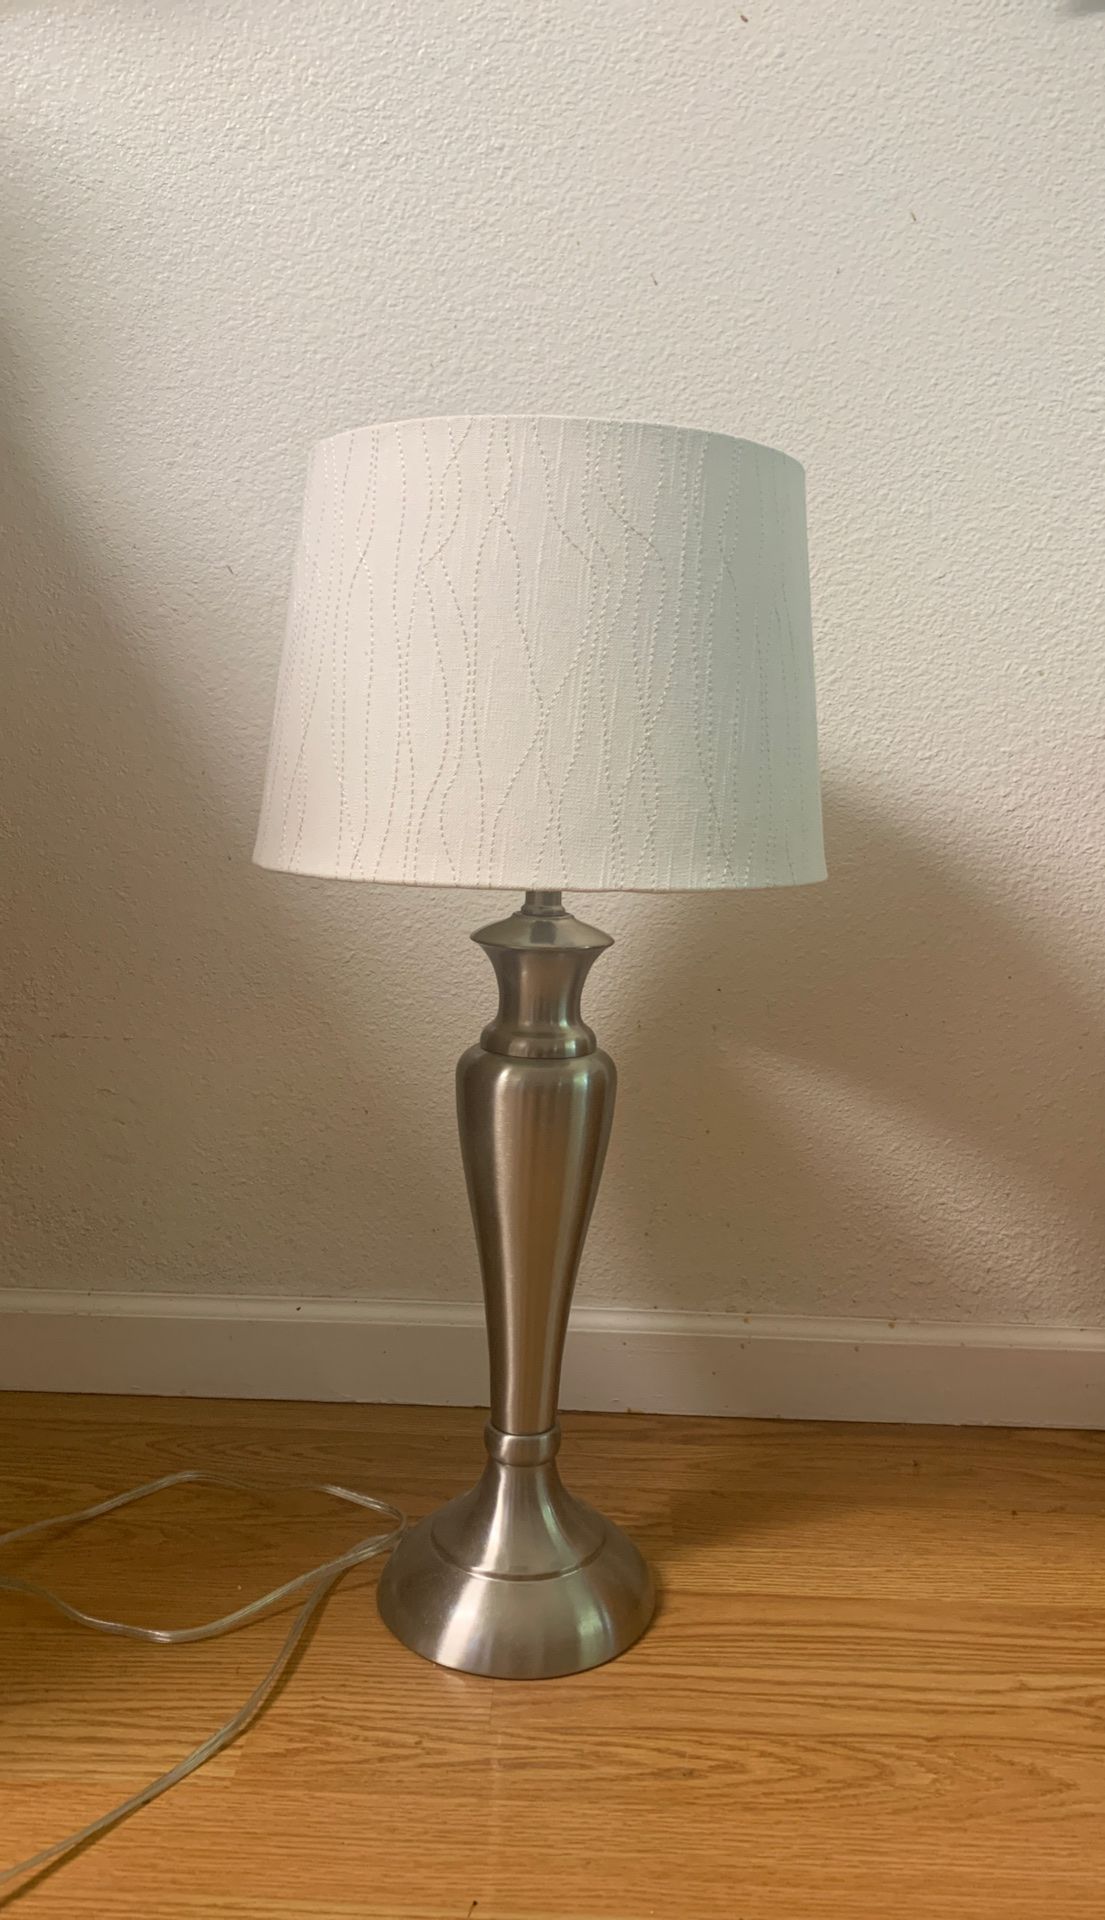 Lamp like new, never used